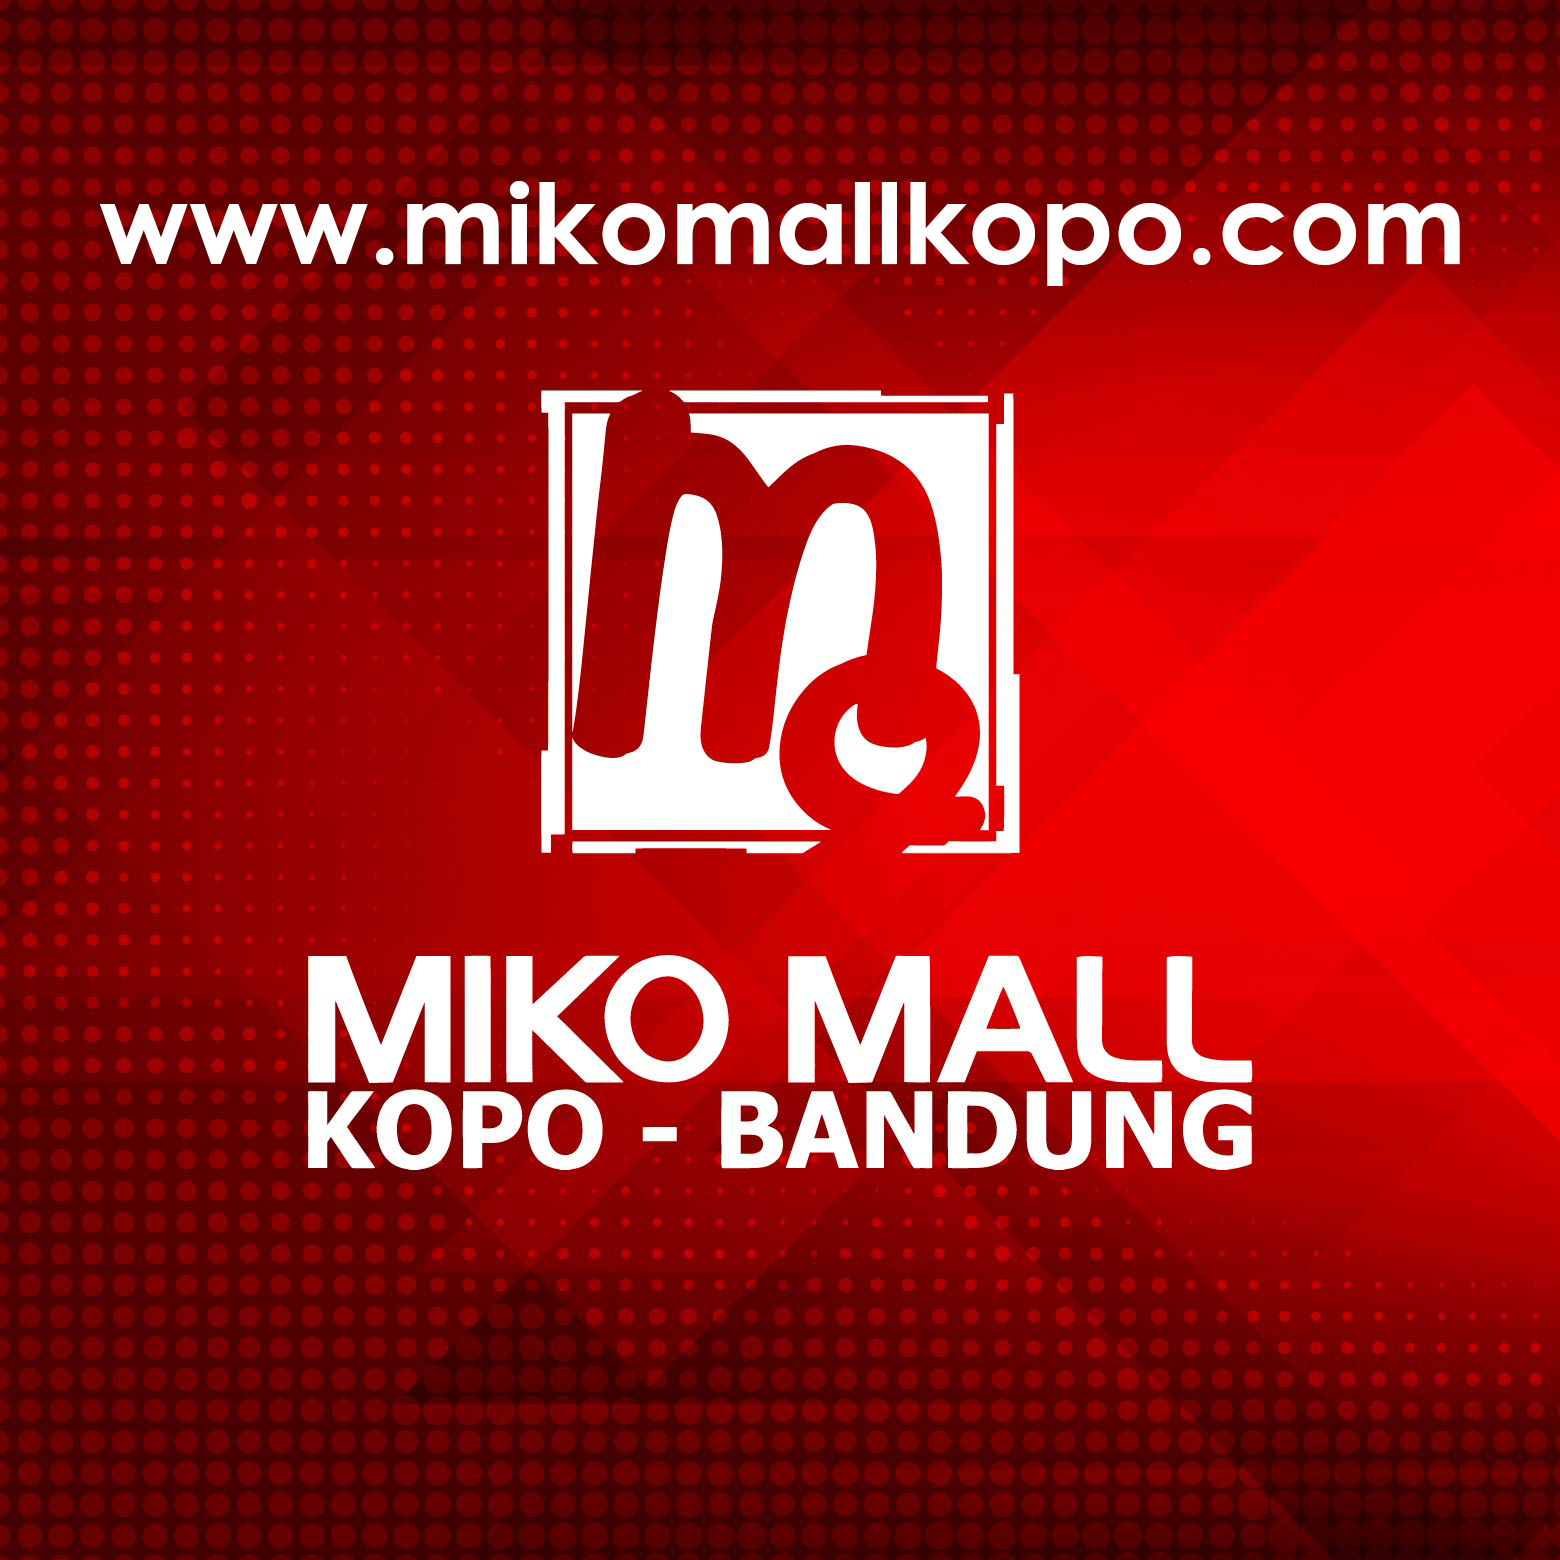 You are currently viewing OFFICIAL WEBSITE MIKO MALL KOPO